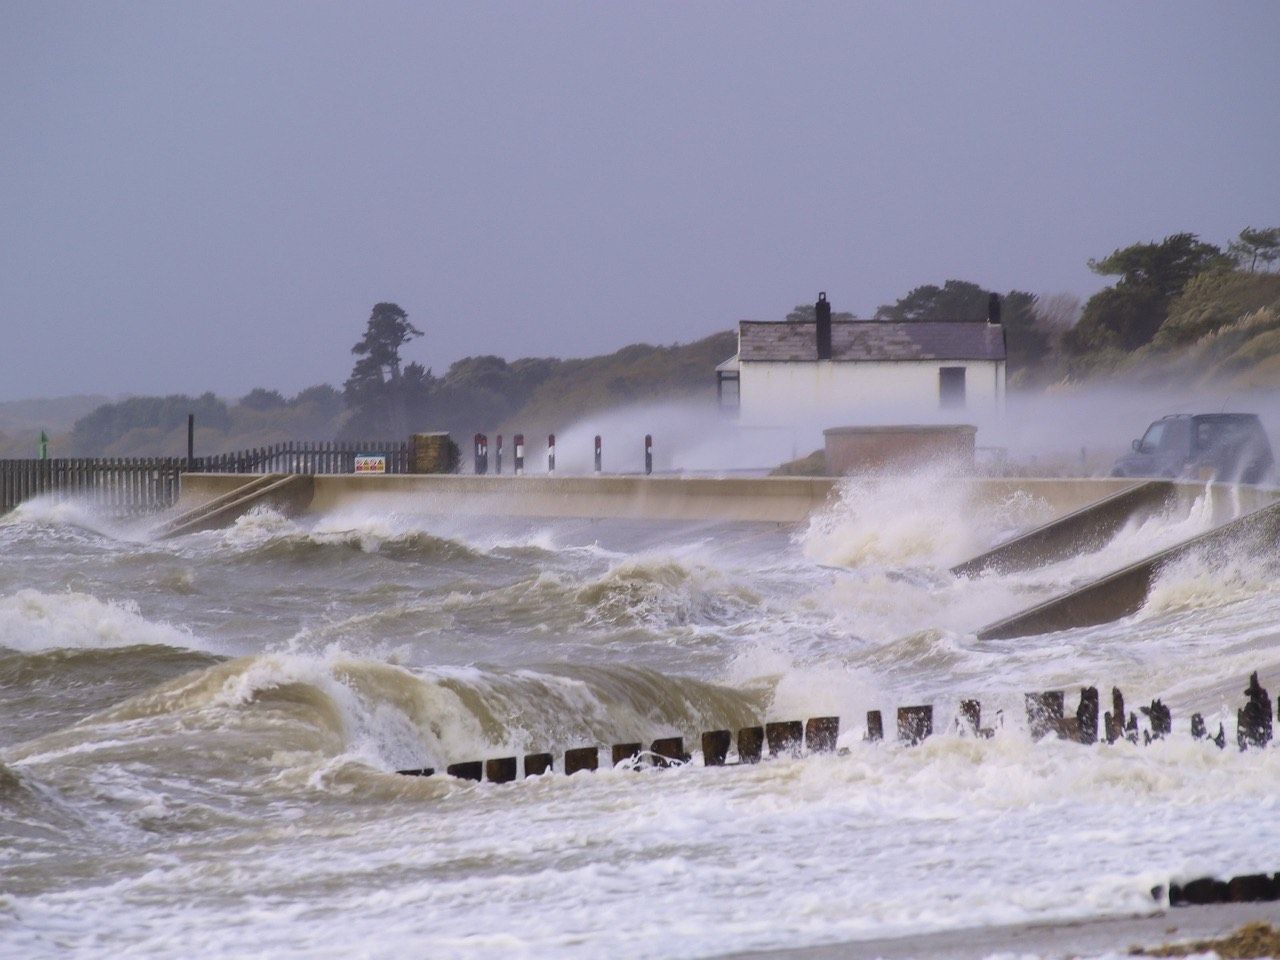 Storm Eunice: red alert in Ireland and England